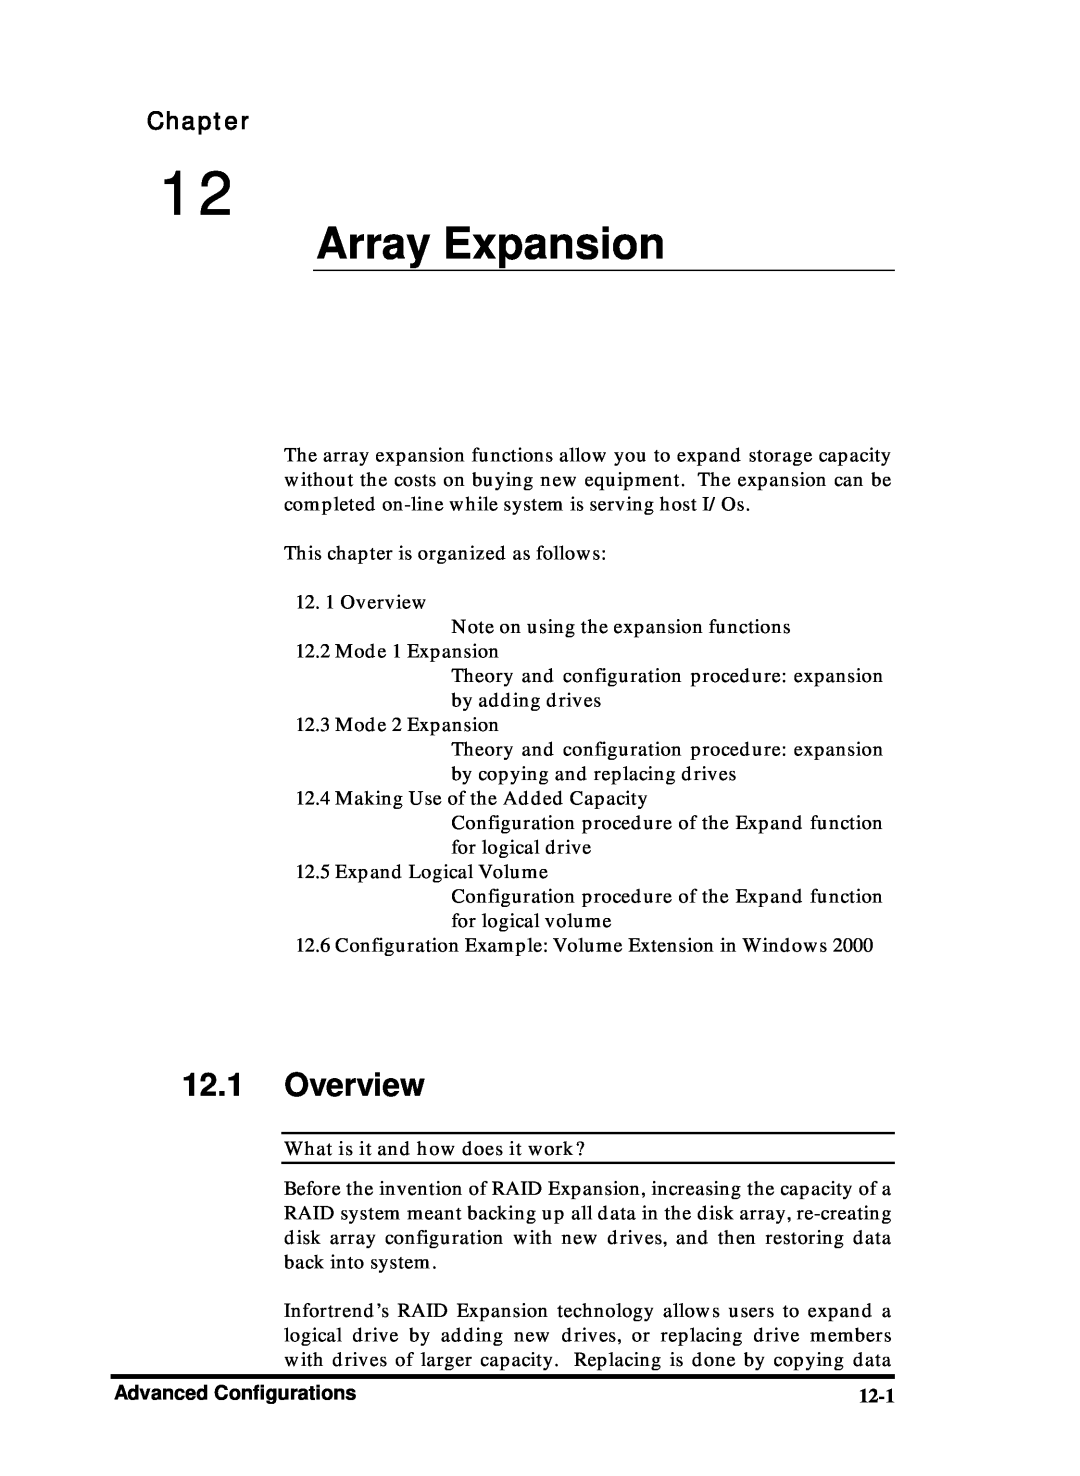 Compaq Infortrend manual Array Expansion, Overview, What is it and how does it work?, 12-1, Chapter 